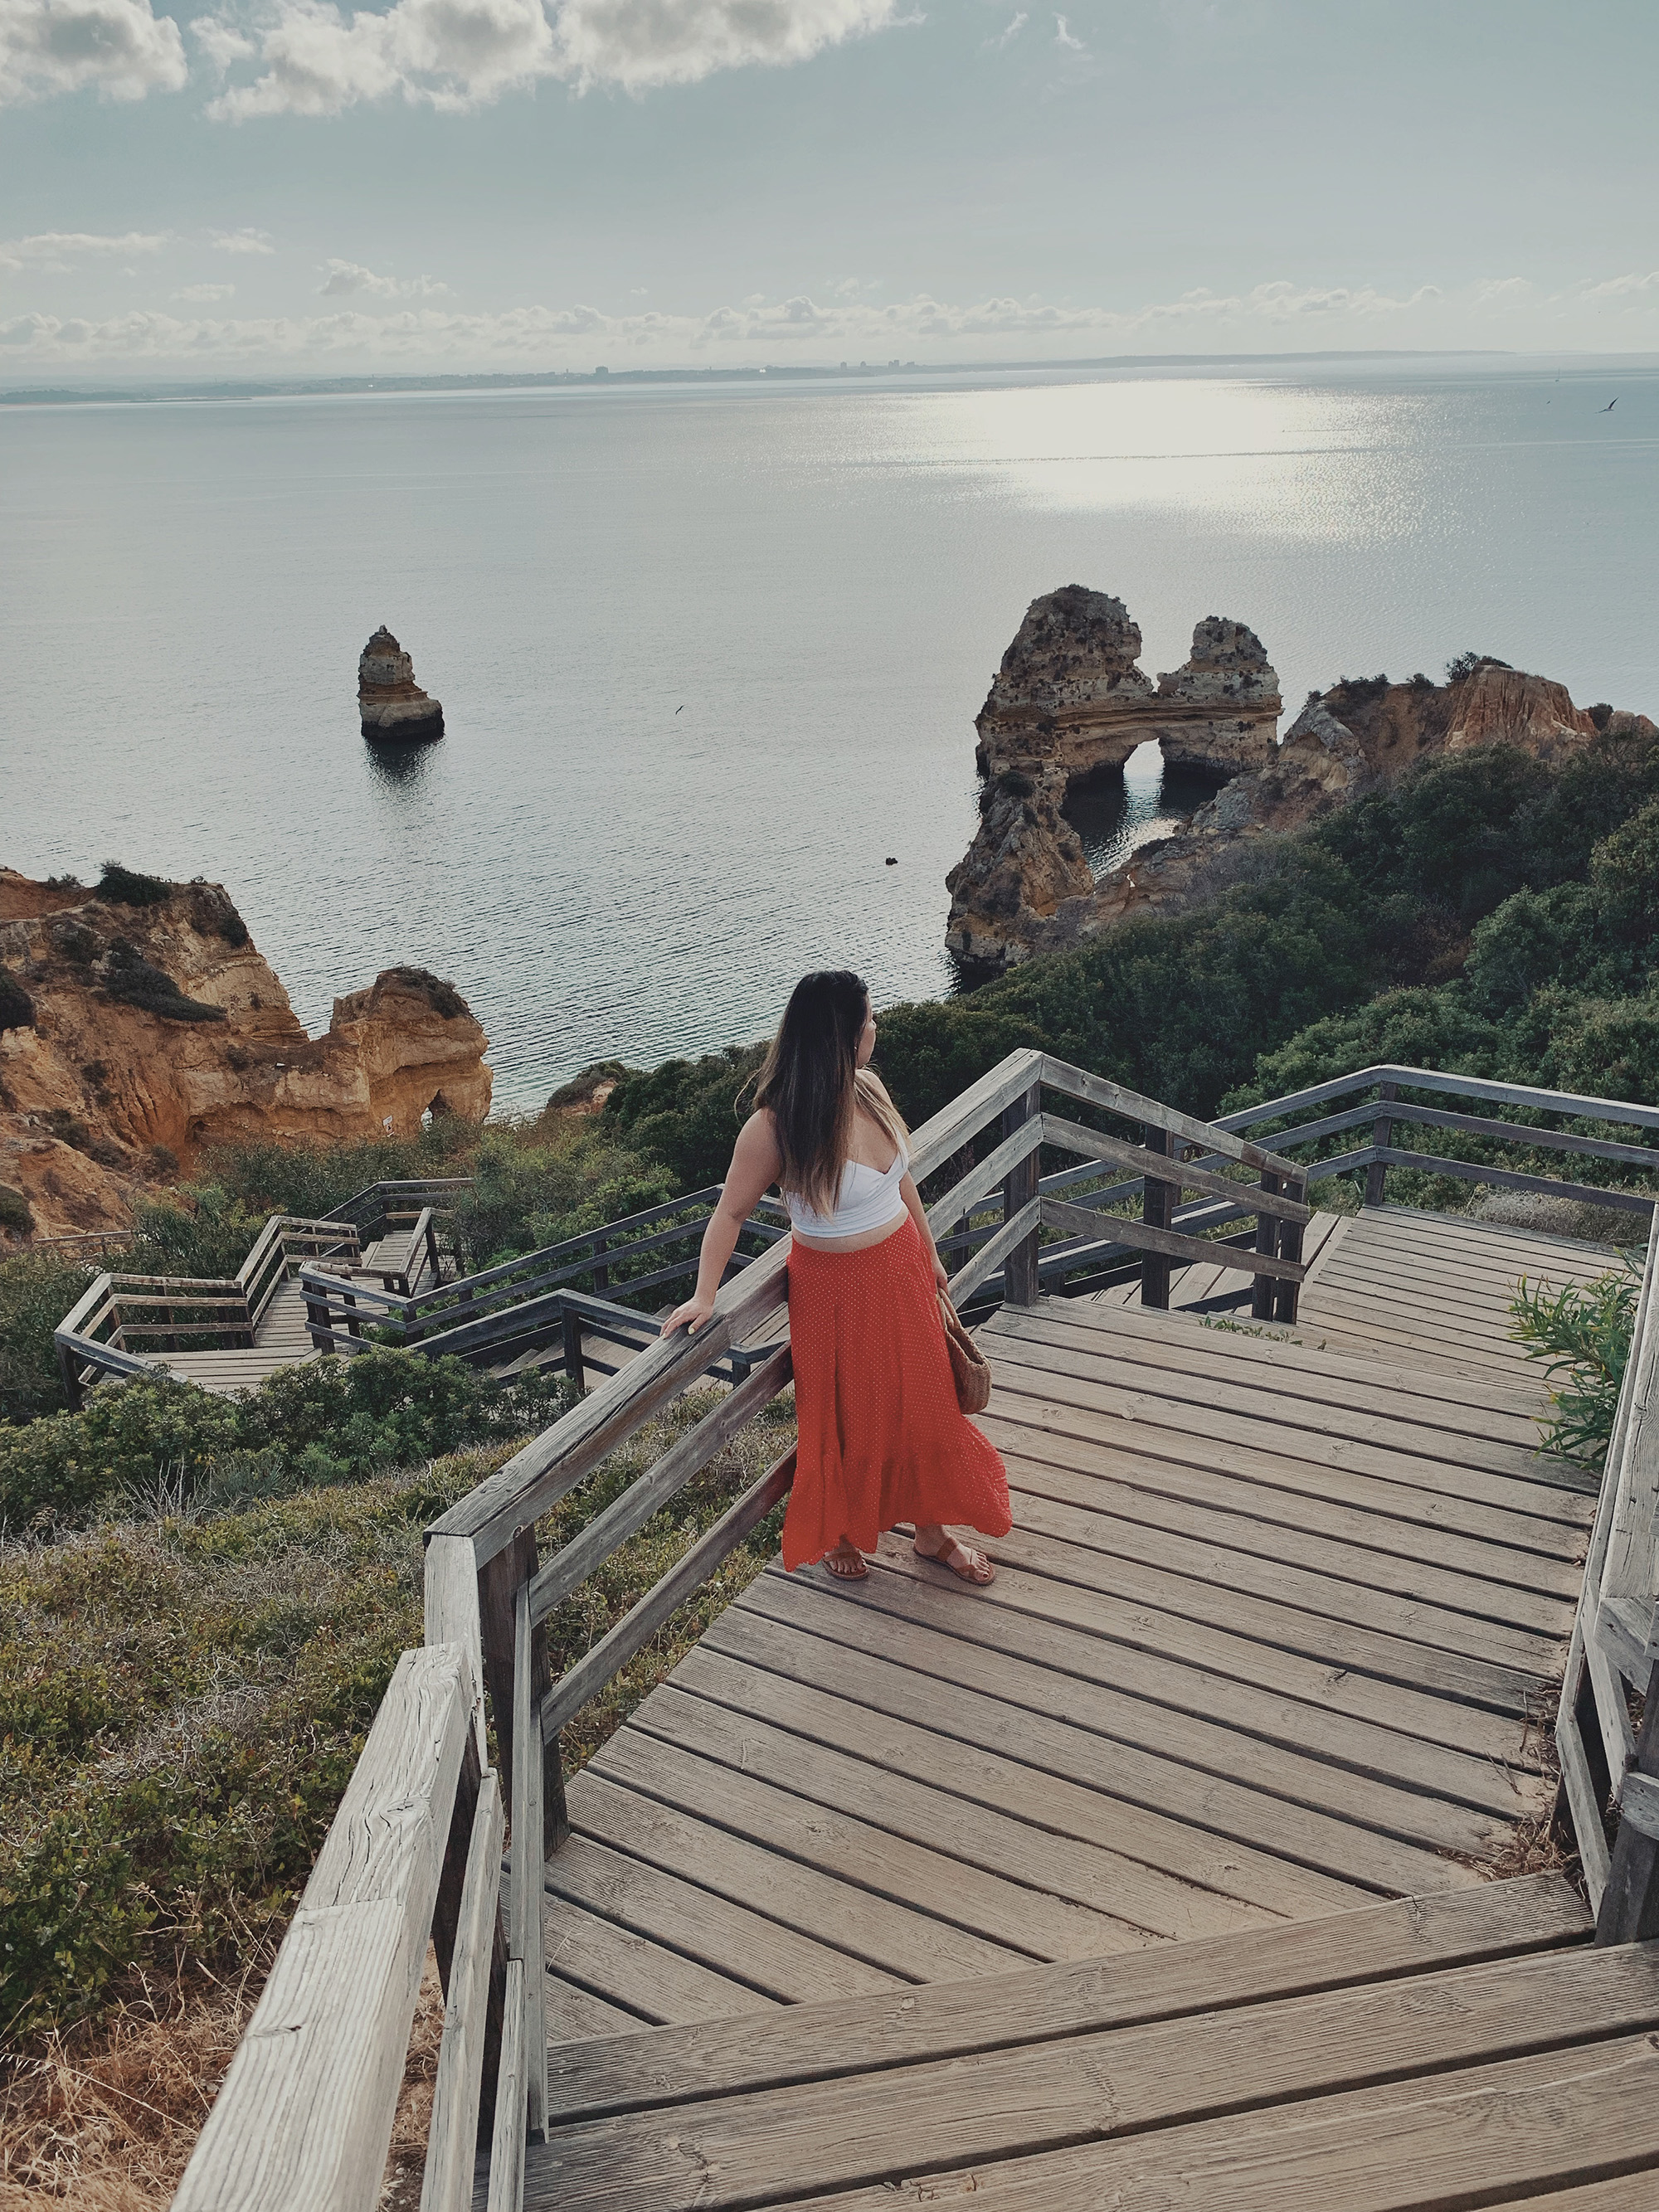 Lagos is a gorgeous coastal town in Portugal's Algarve region known for some of the country's most glorious beaches. Here's a guide to everything you need to know!